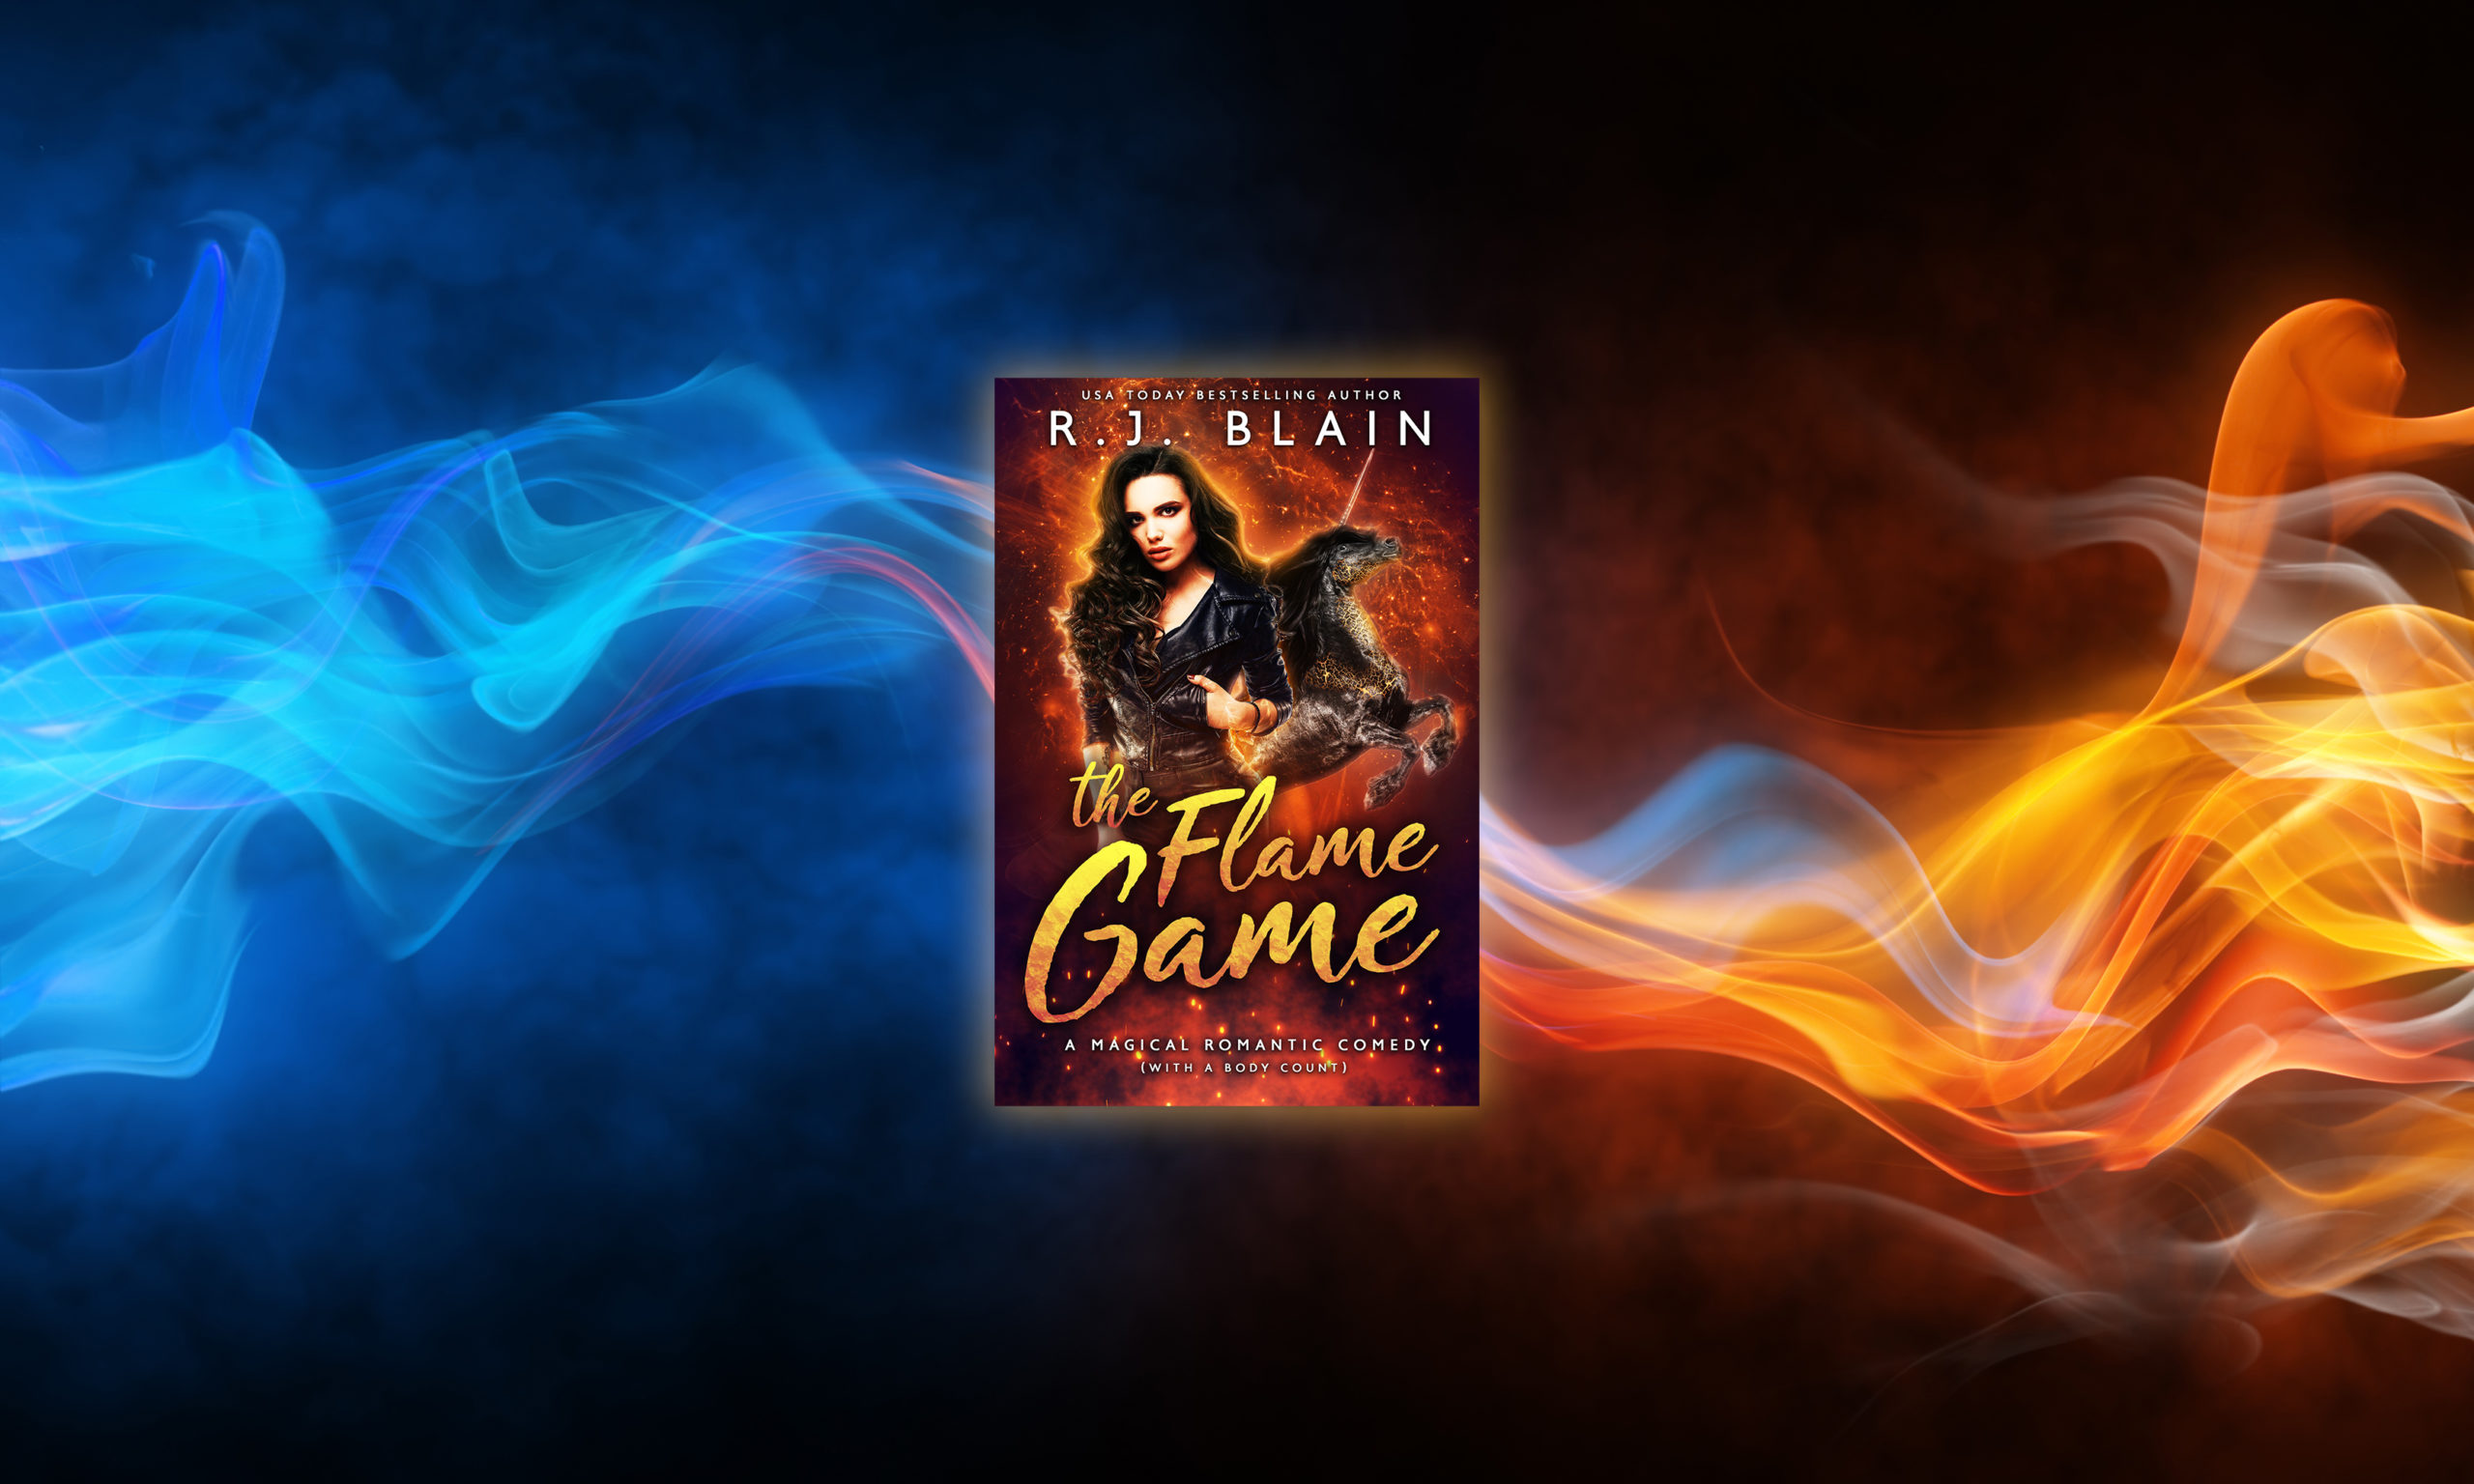 The Flame Game has released! (Plus other news from the trenches.)